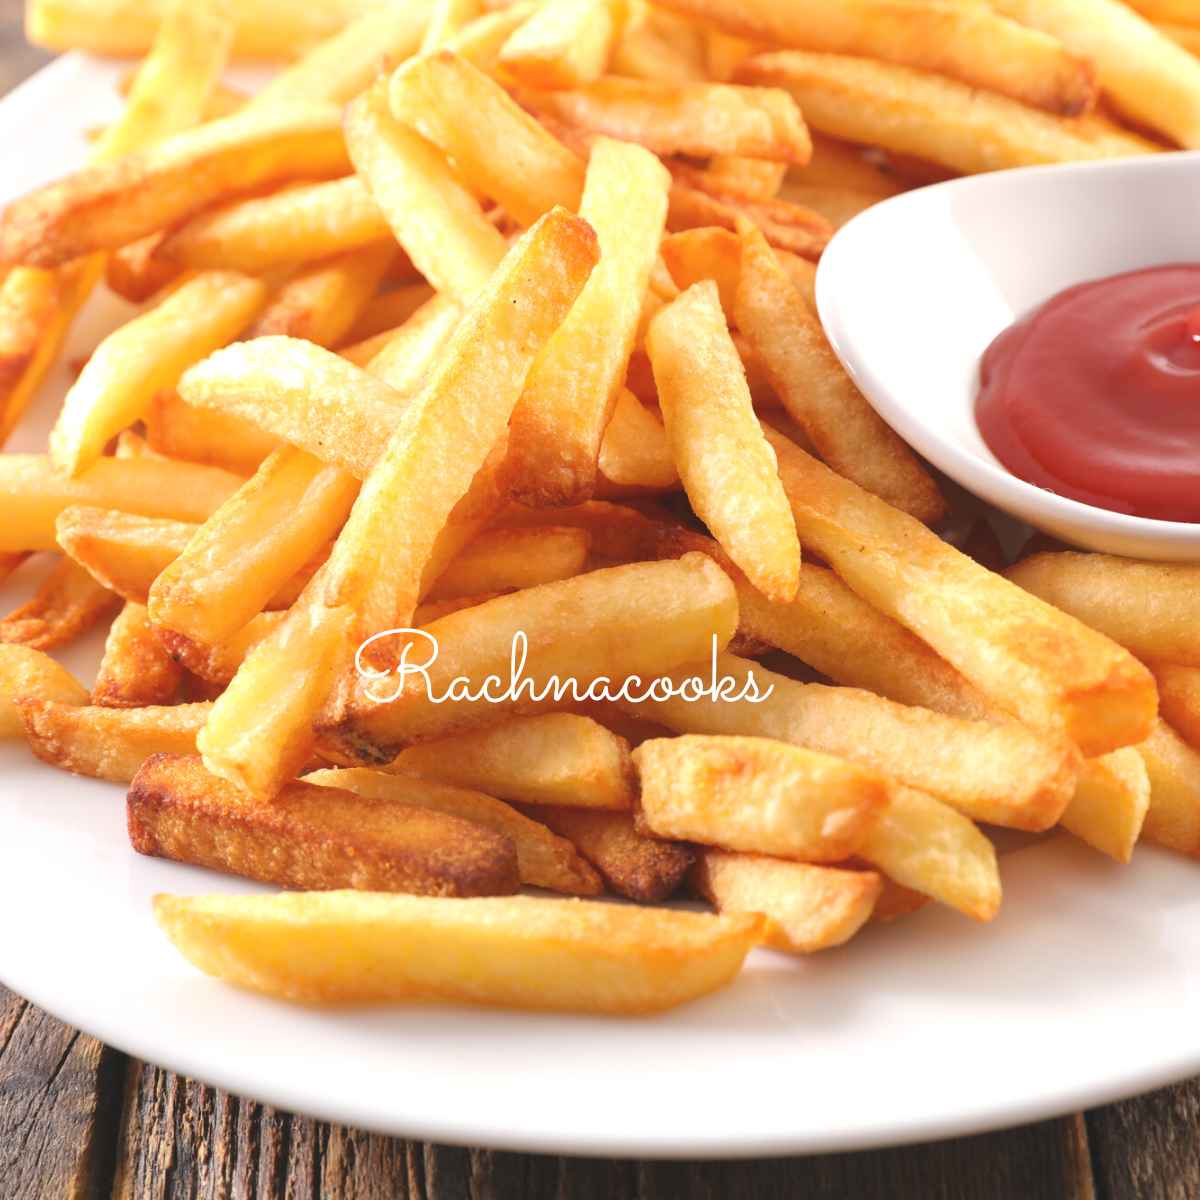 A plate full of air fried fries served with ketchup